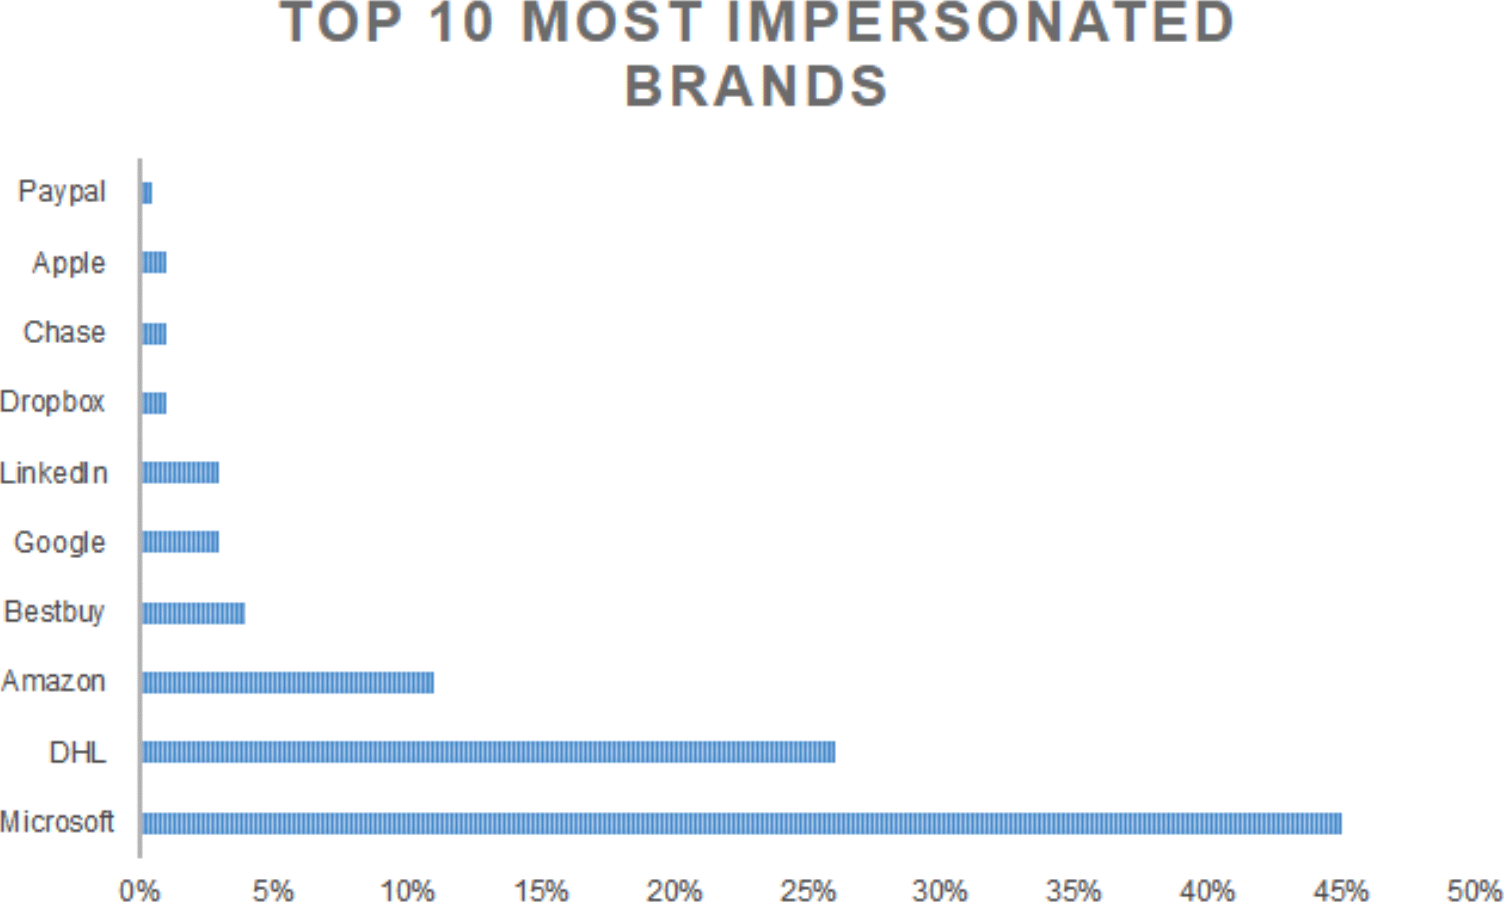 Q2 2021 Top 10 Most Impersonated Brands in Domains 2